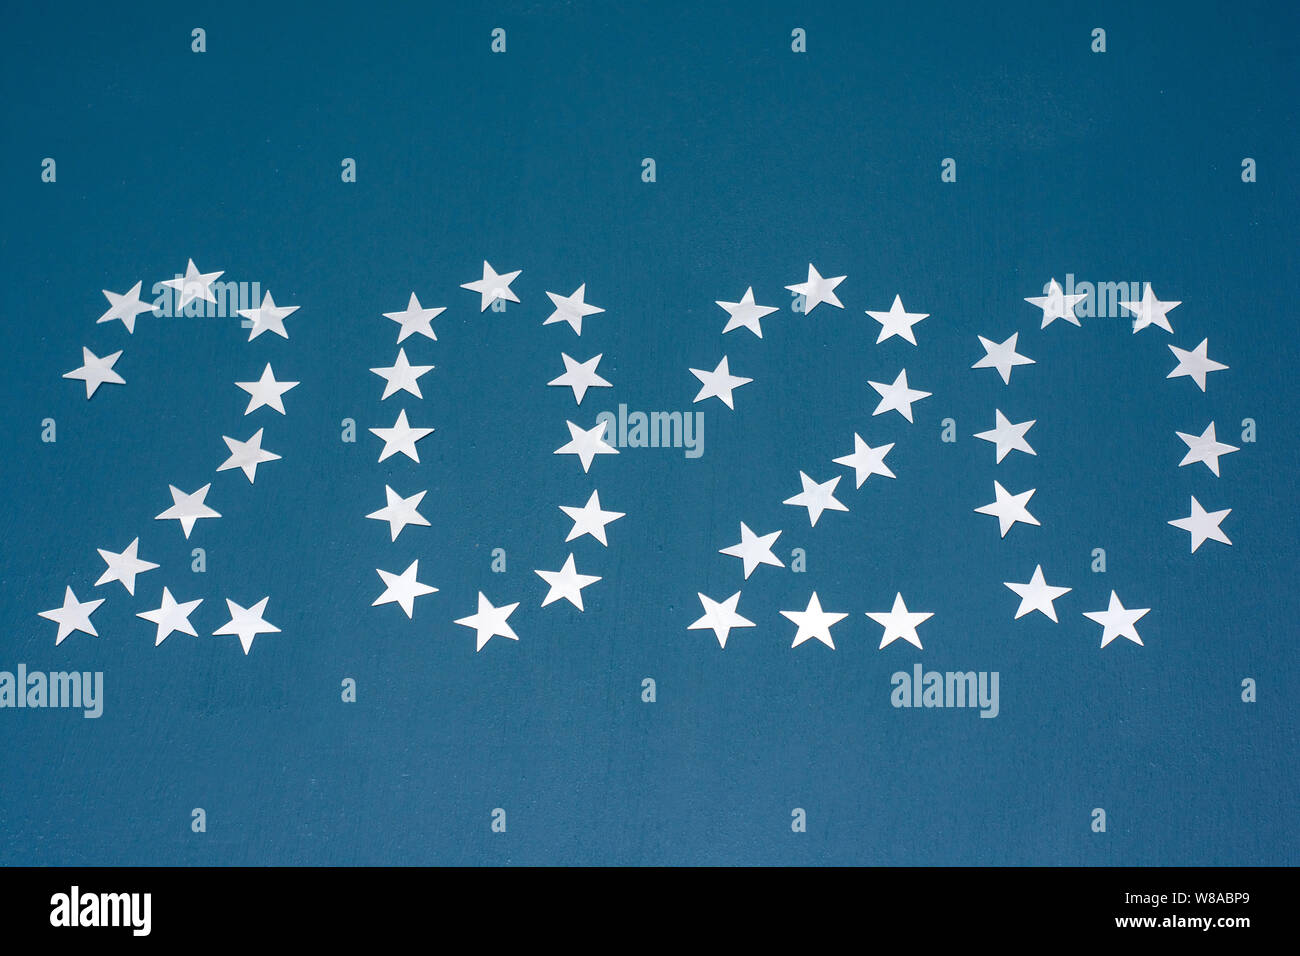 Happy New Year 2020. The emblem of the new 2020. Figures laid out with confetti on a blue background. Stock Photo